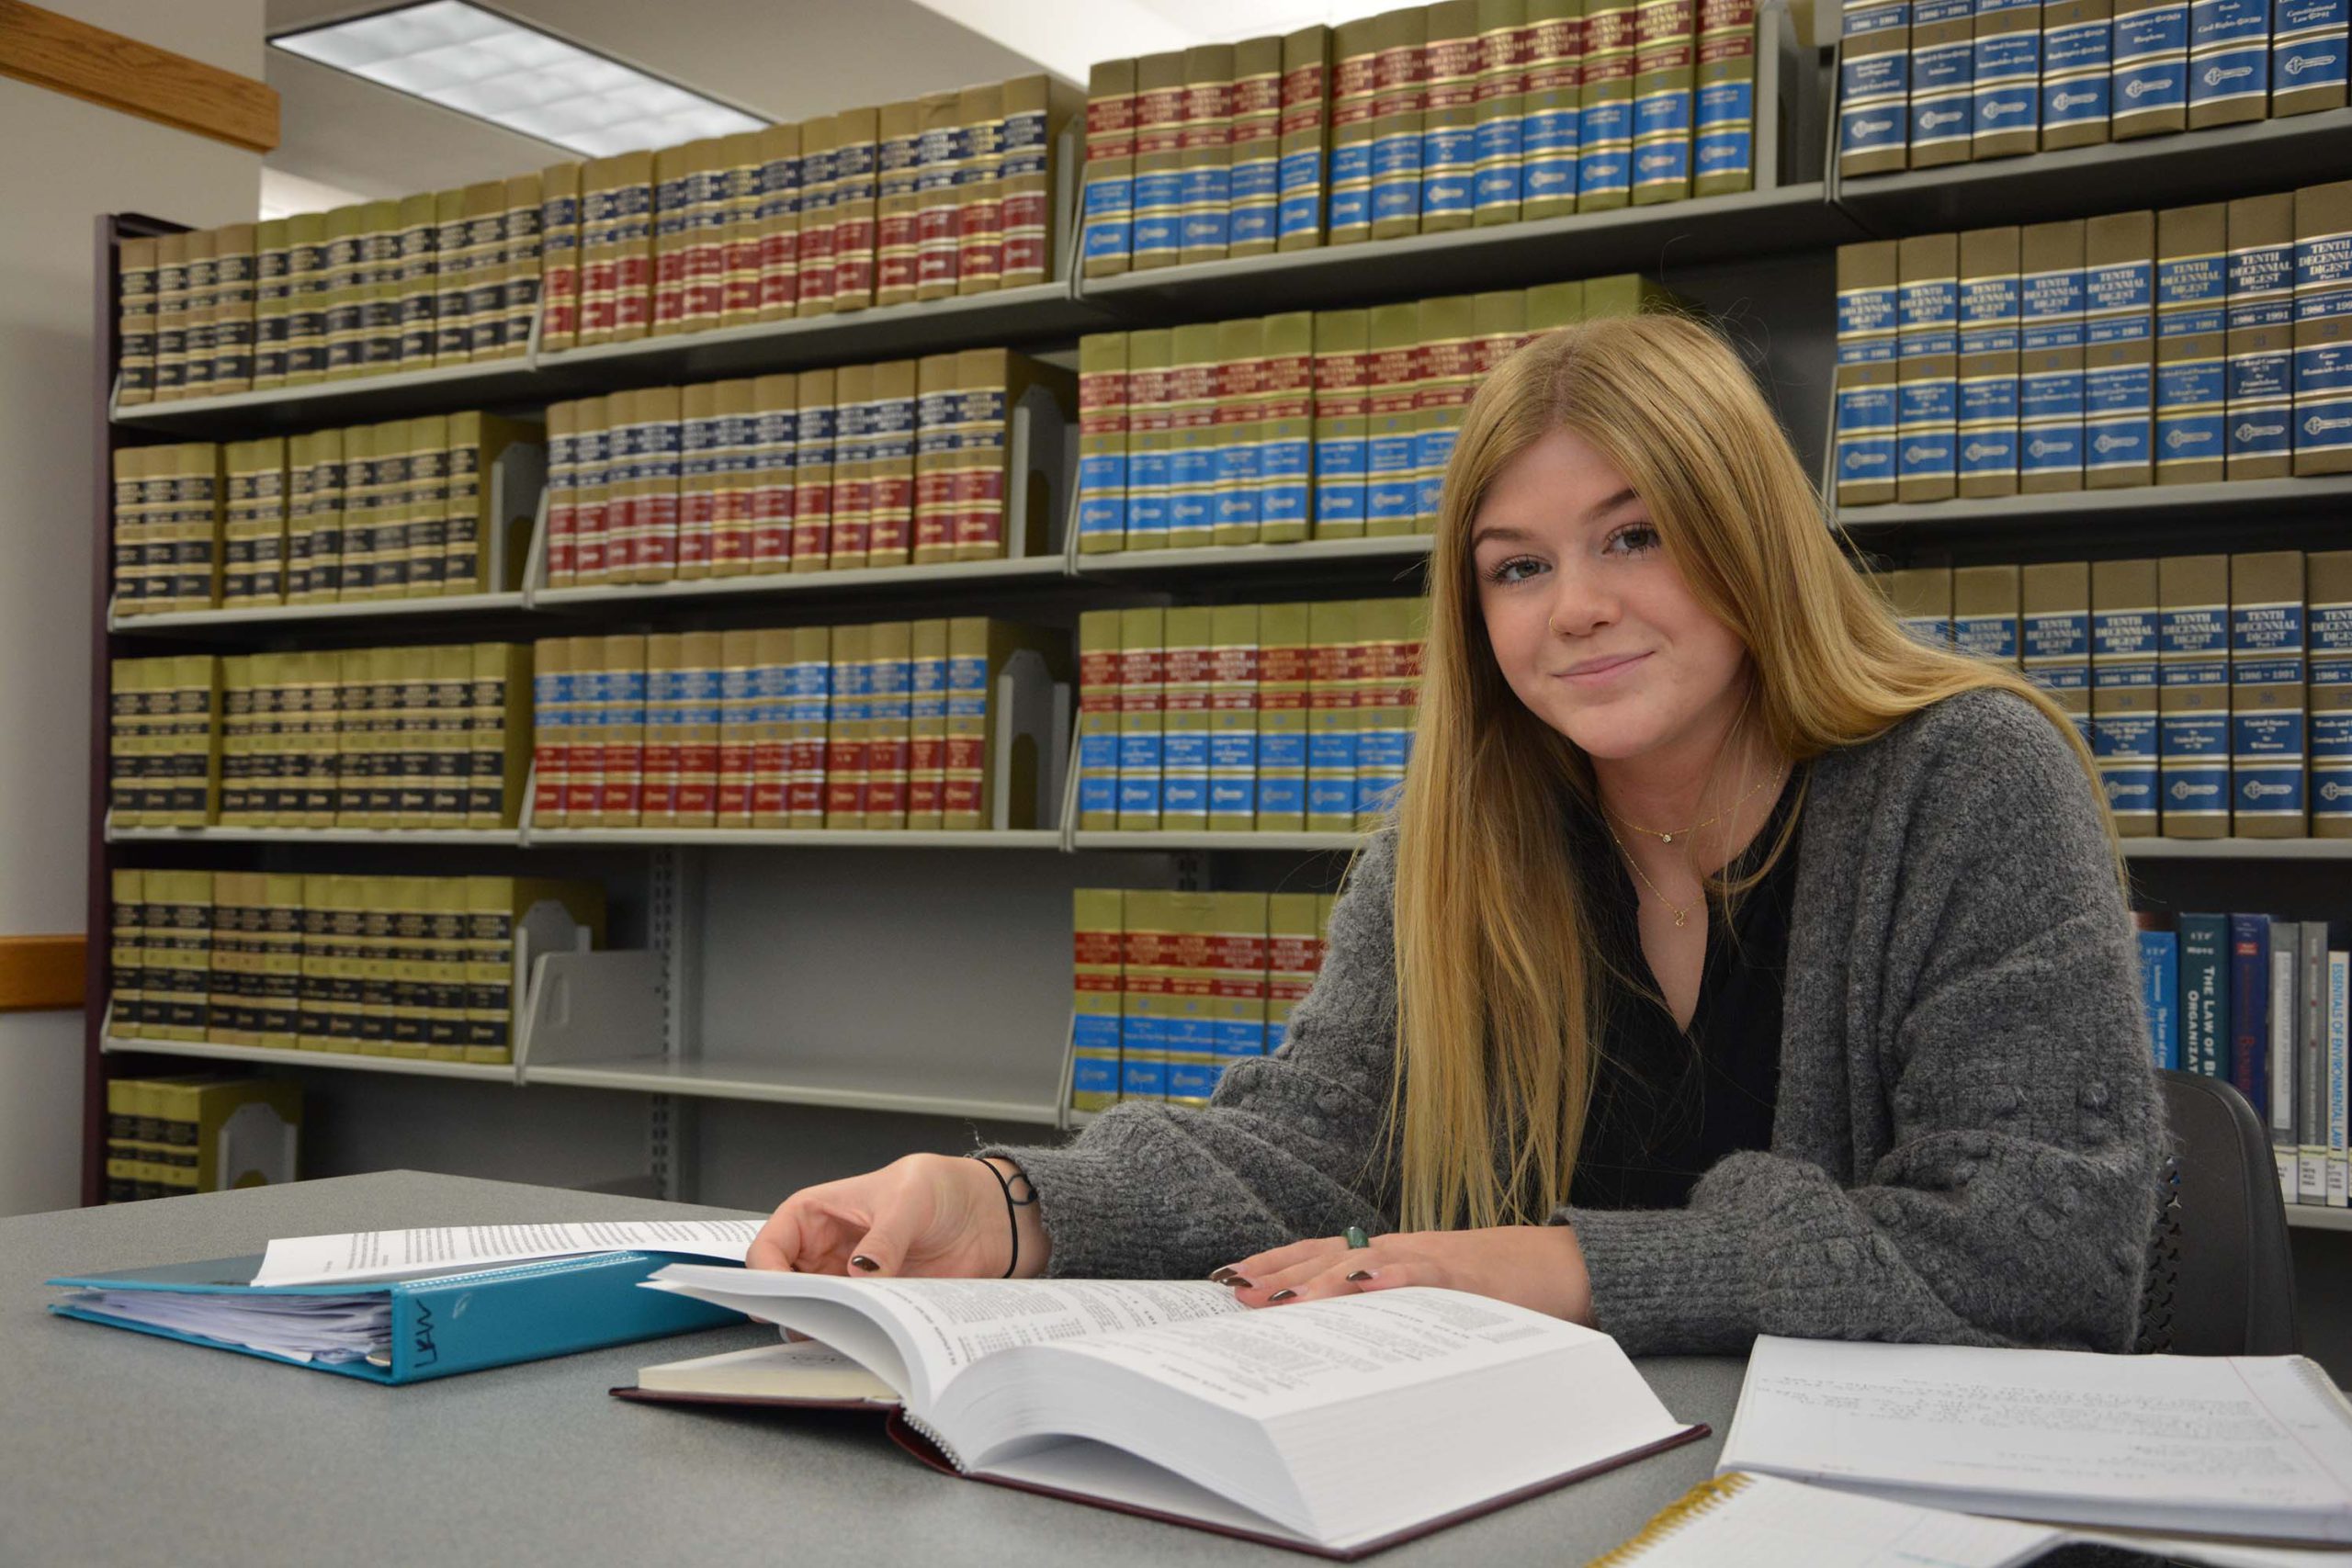 SWIC paralegal student studying in library